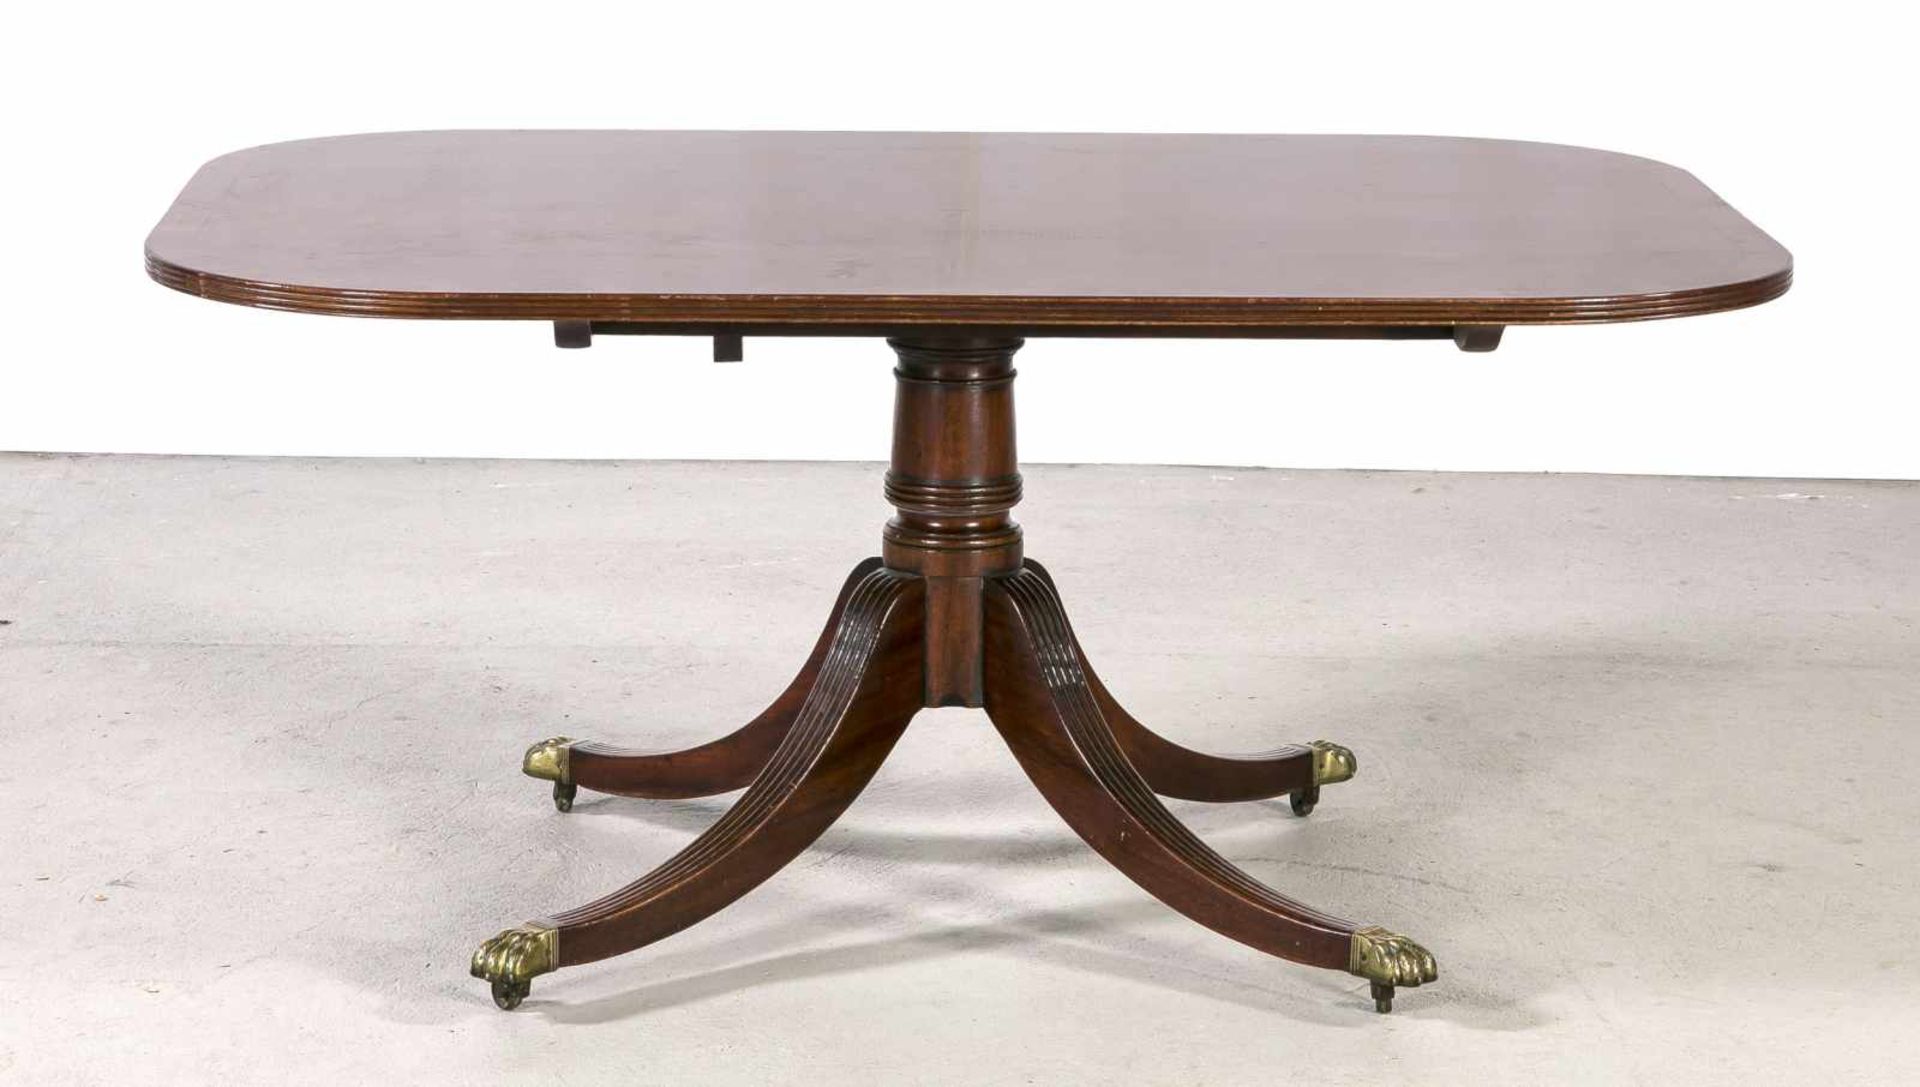 English mahogany dining table with copper claw feet and wheels. 20th century. Dimensions: 71 x 104 x